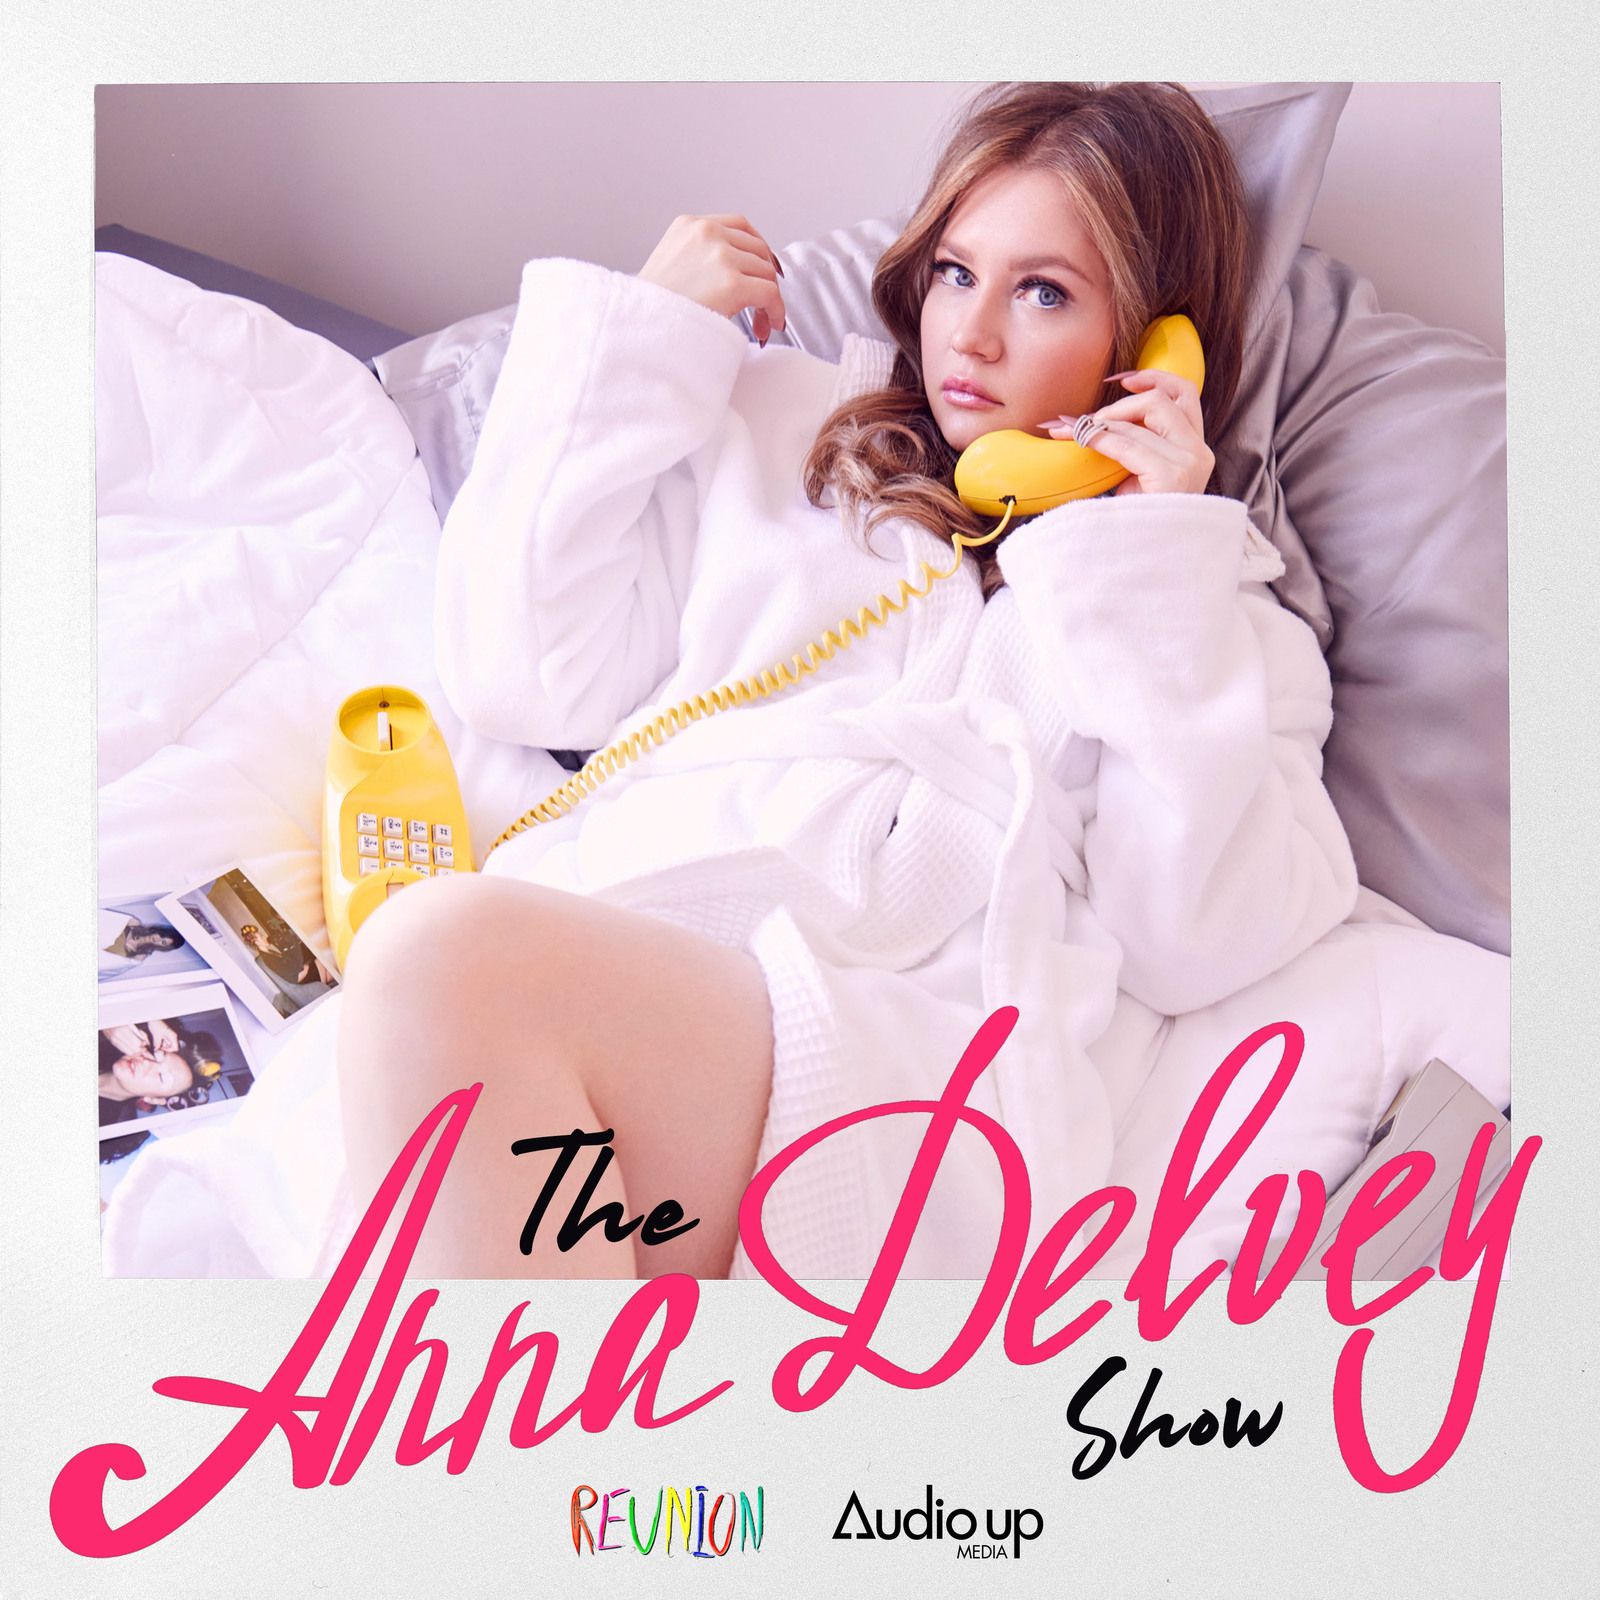 The Anna Delvey Show podcast show image